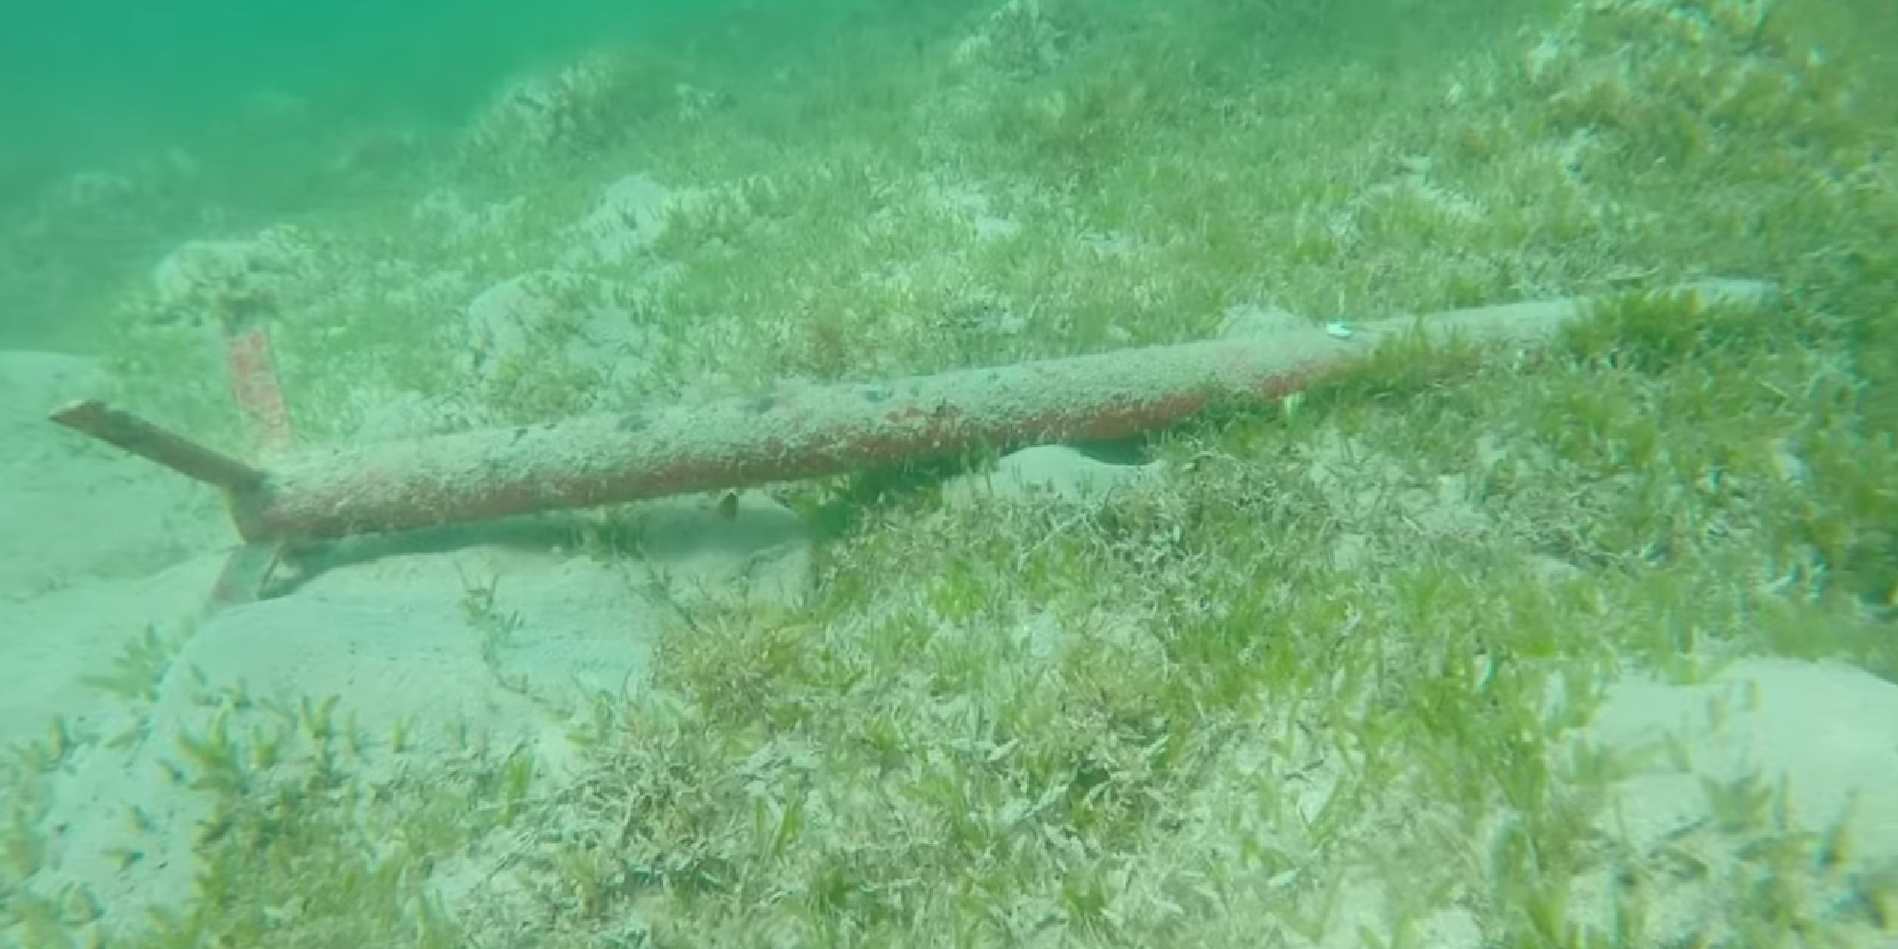 Unexploded Ordnance found on sea bed